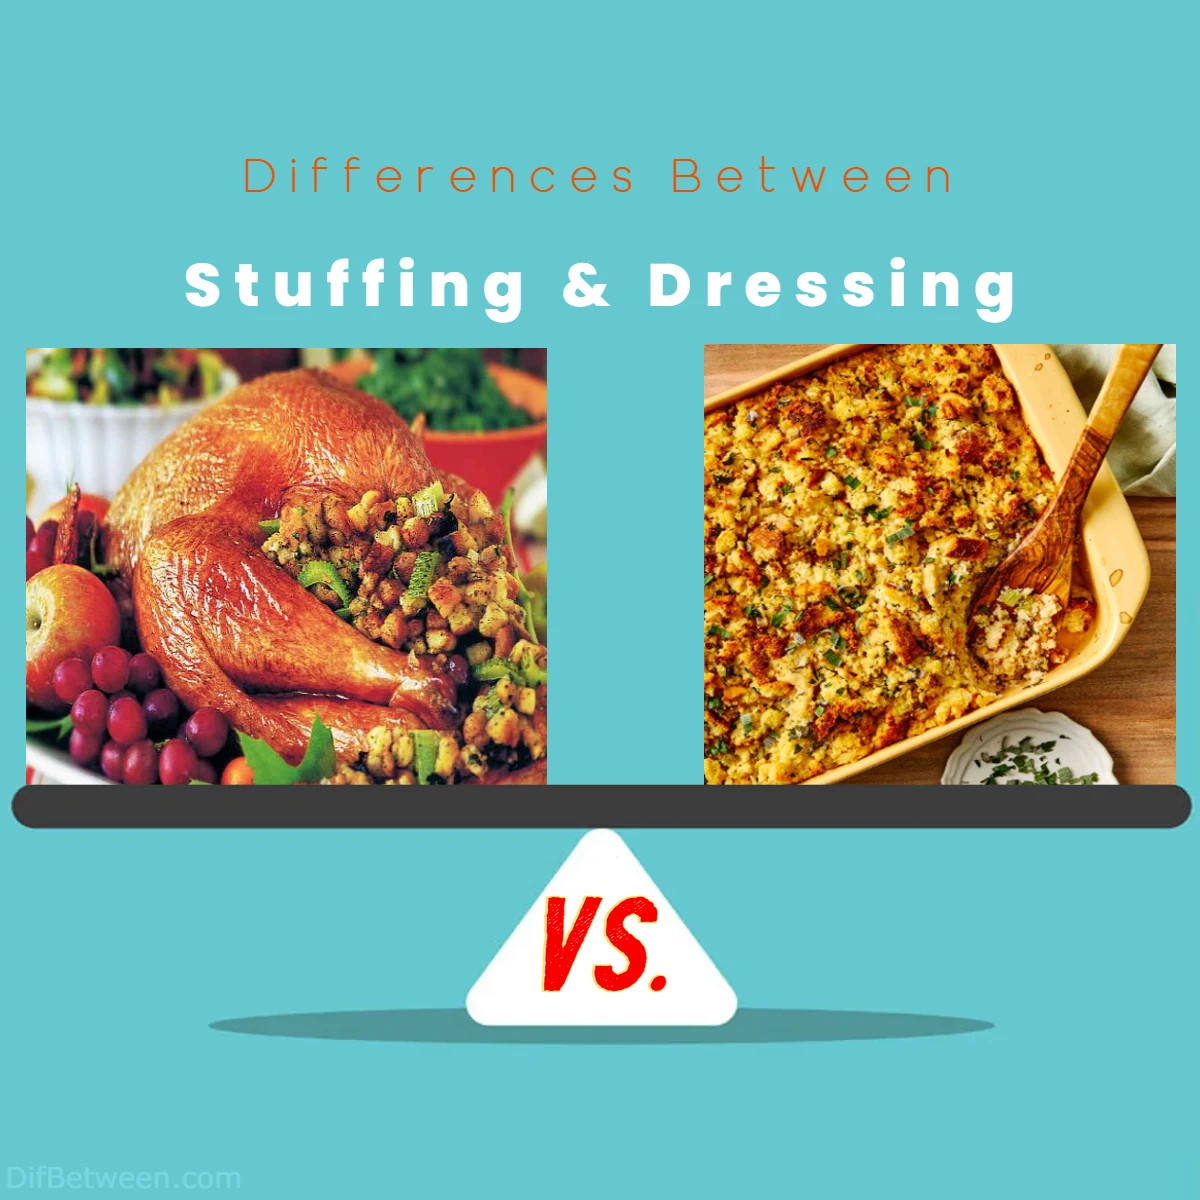 Differences Between Stuffing vs Dressing